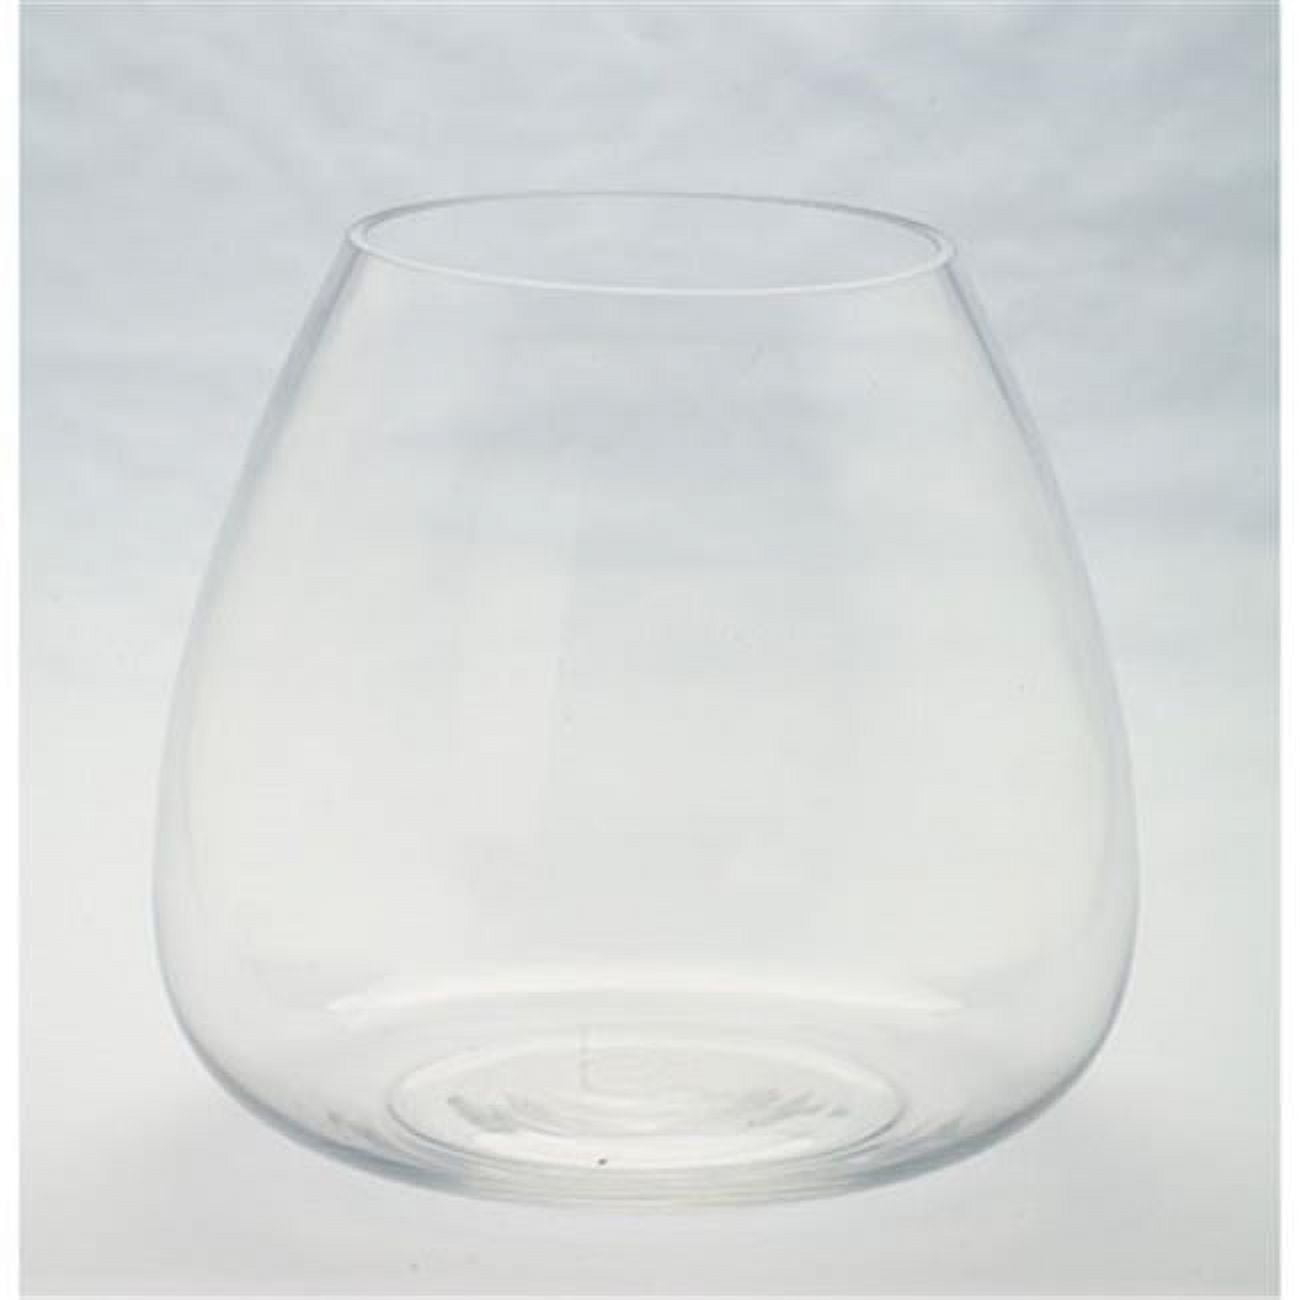 84021l 10 X 10.5 In. Glass Vase Candleholder, Clear